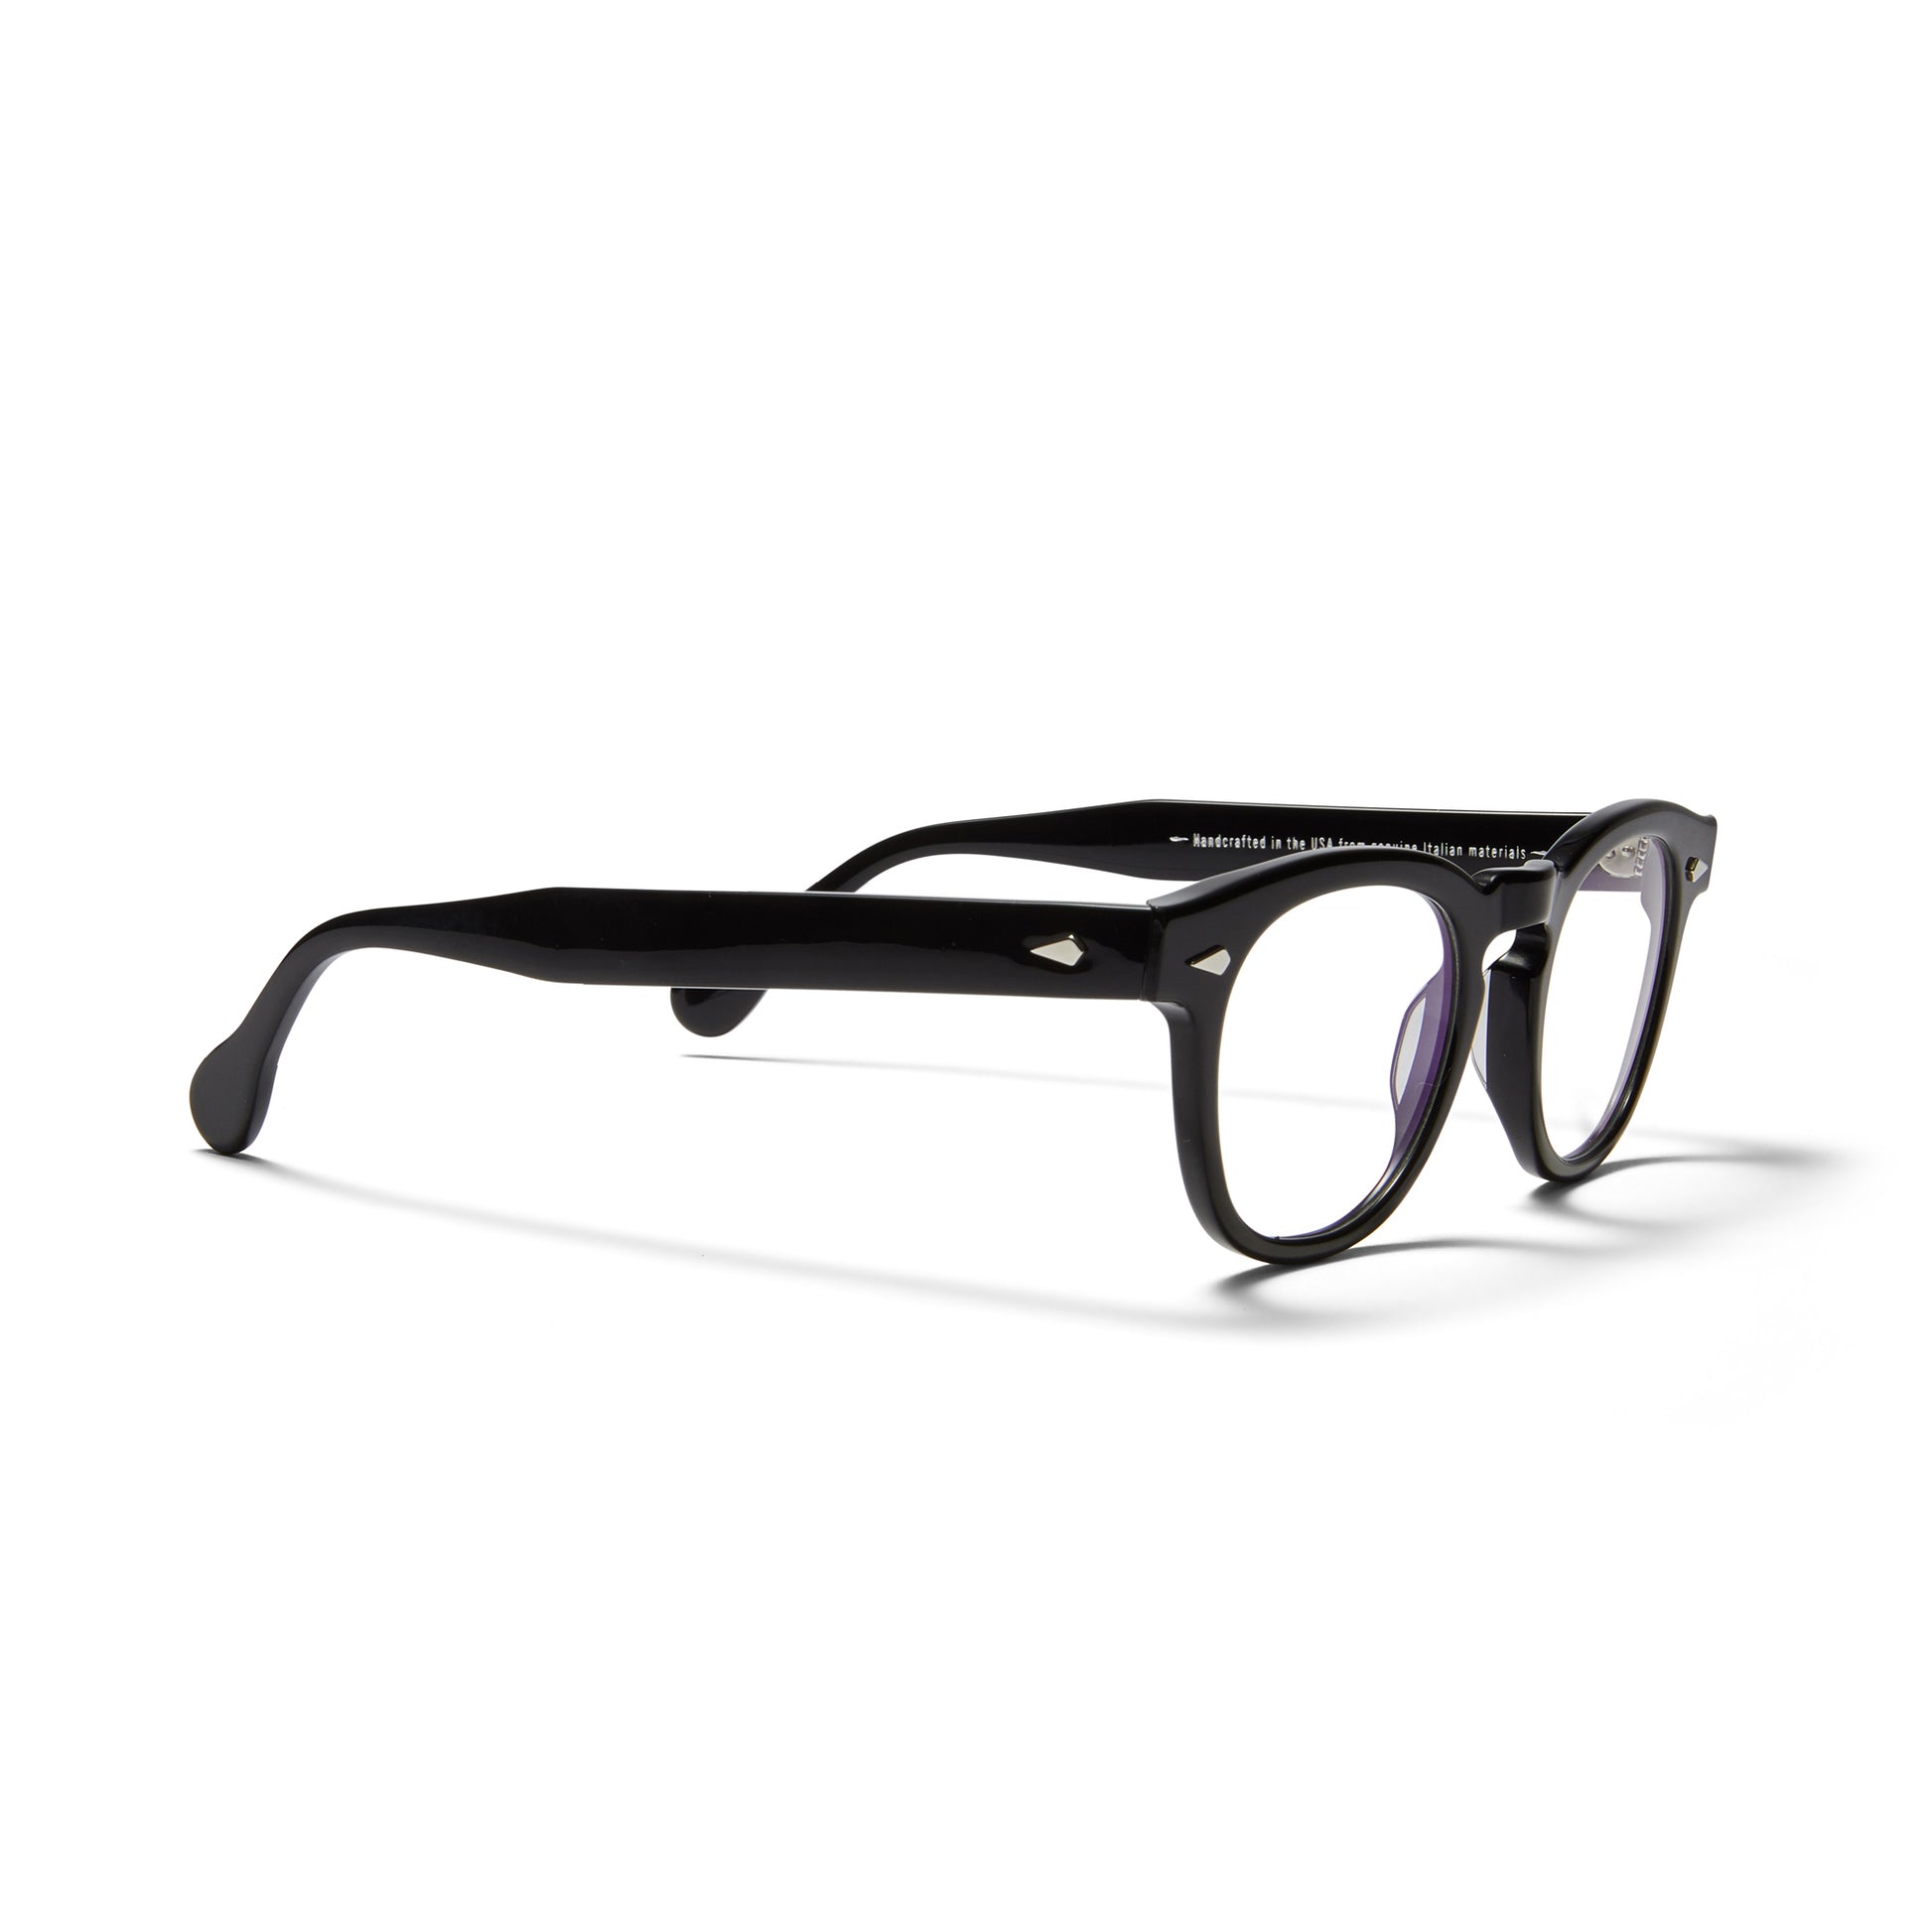 A side view of the glossy black Arnel USA frame—the Vintage eyewear. 